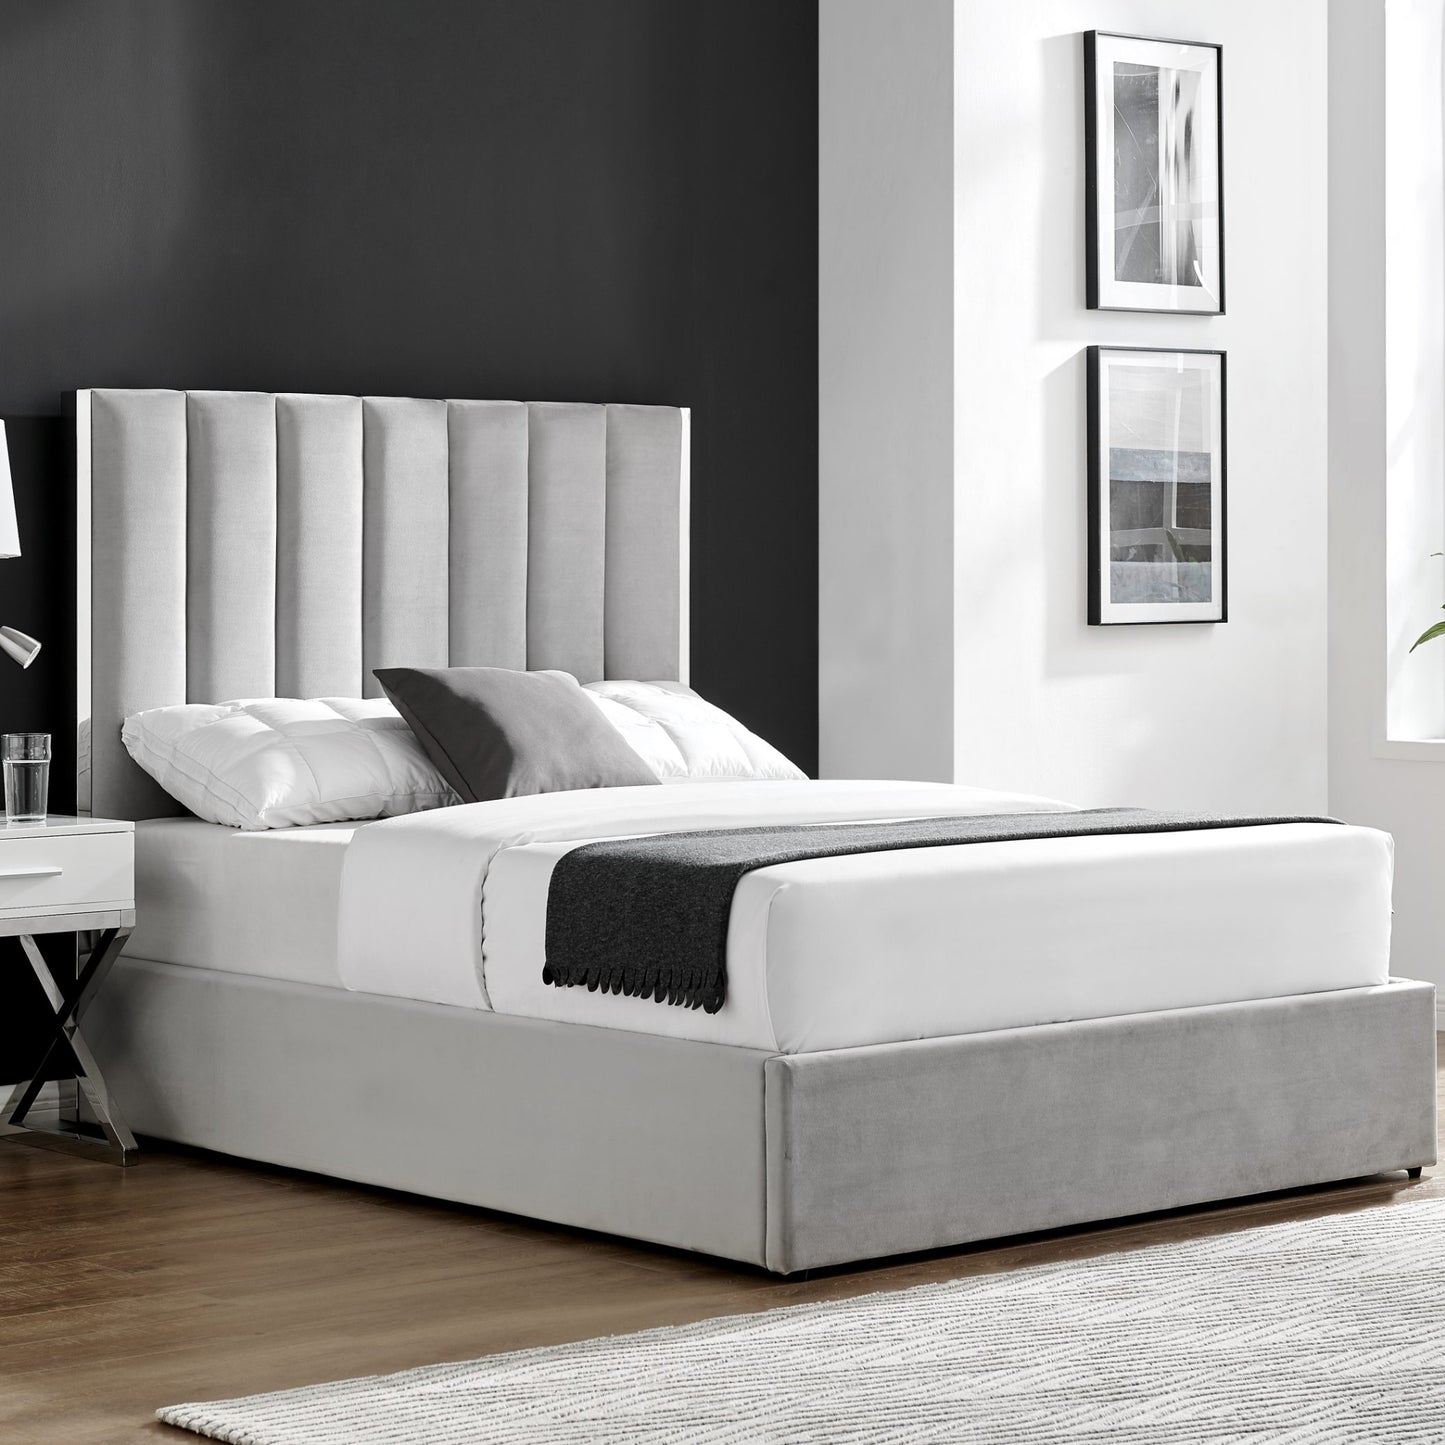 Chloe Grey Bed With Silver Trim And Ottoman Storage